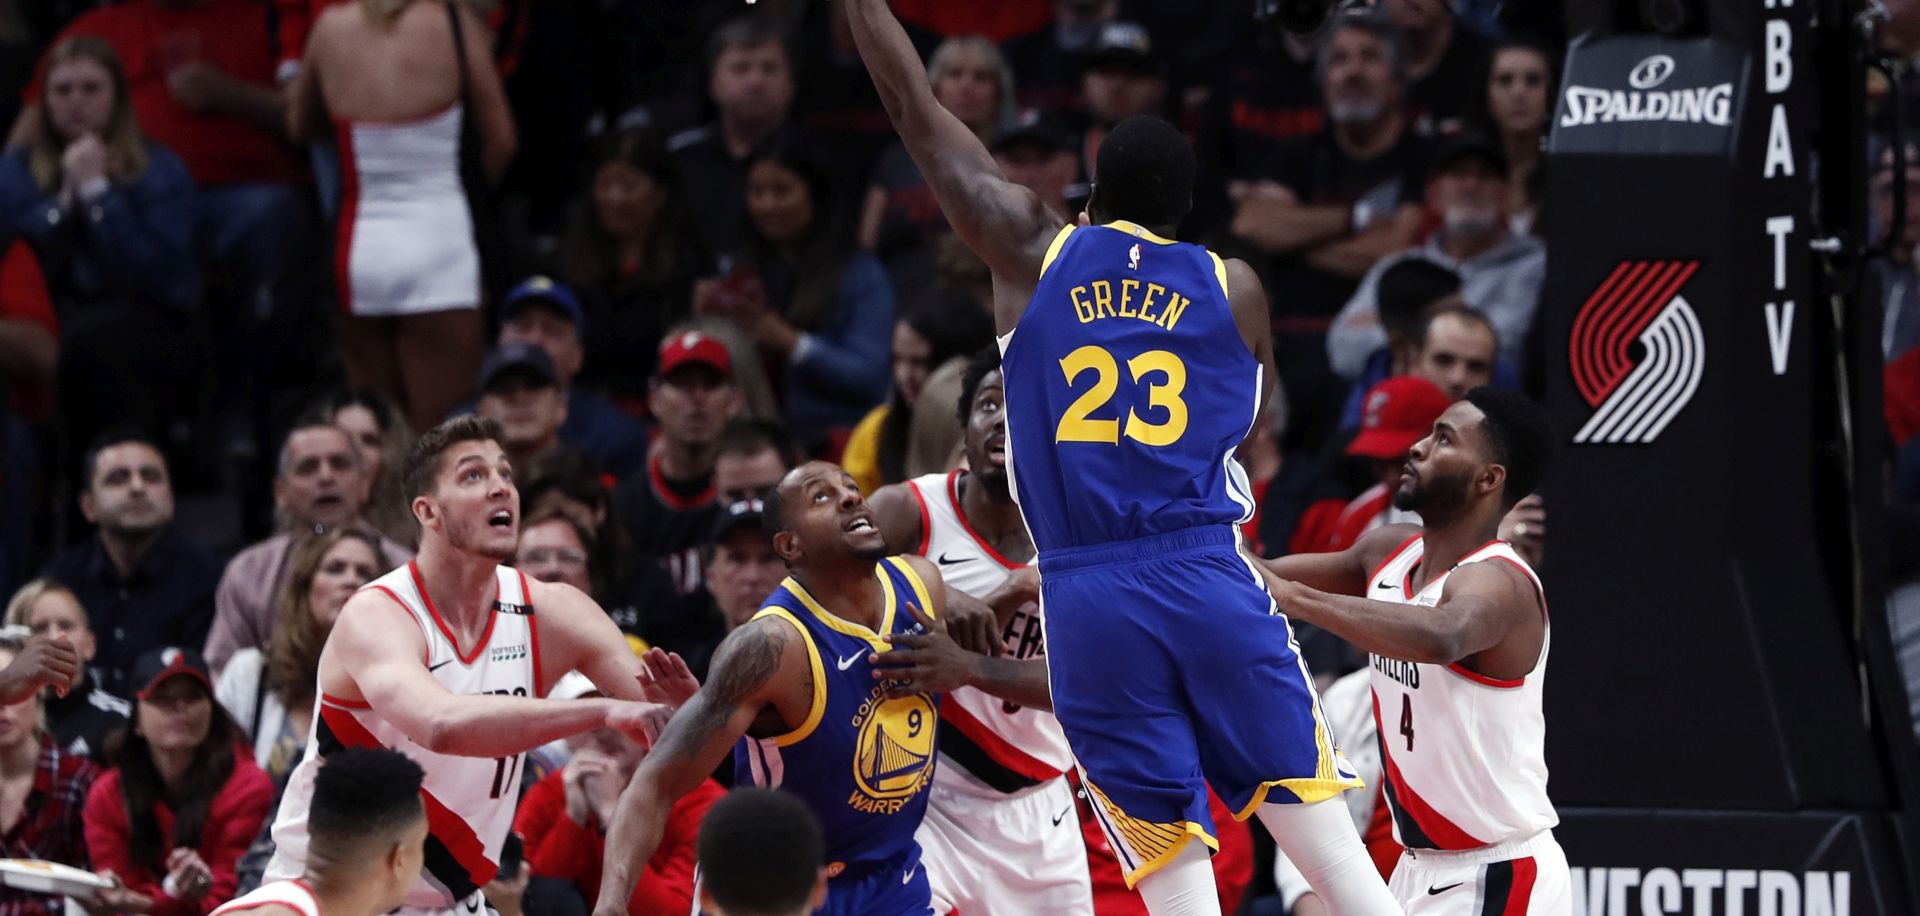 epa07583130 Golden State Warriors forward Draymond Green (2-R) in action during the NBA Western Conference Playoff Finals game three between the Golden State Warriors and the Portland Trail Blazers at the Moda Center in Portland, Oregon, USA, 18 May 2019.  EPA/JOHN G. MABANGLO SHUTTERSTOCK OUT